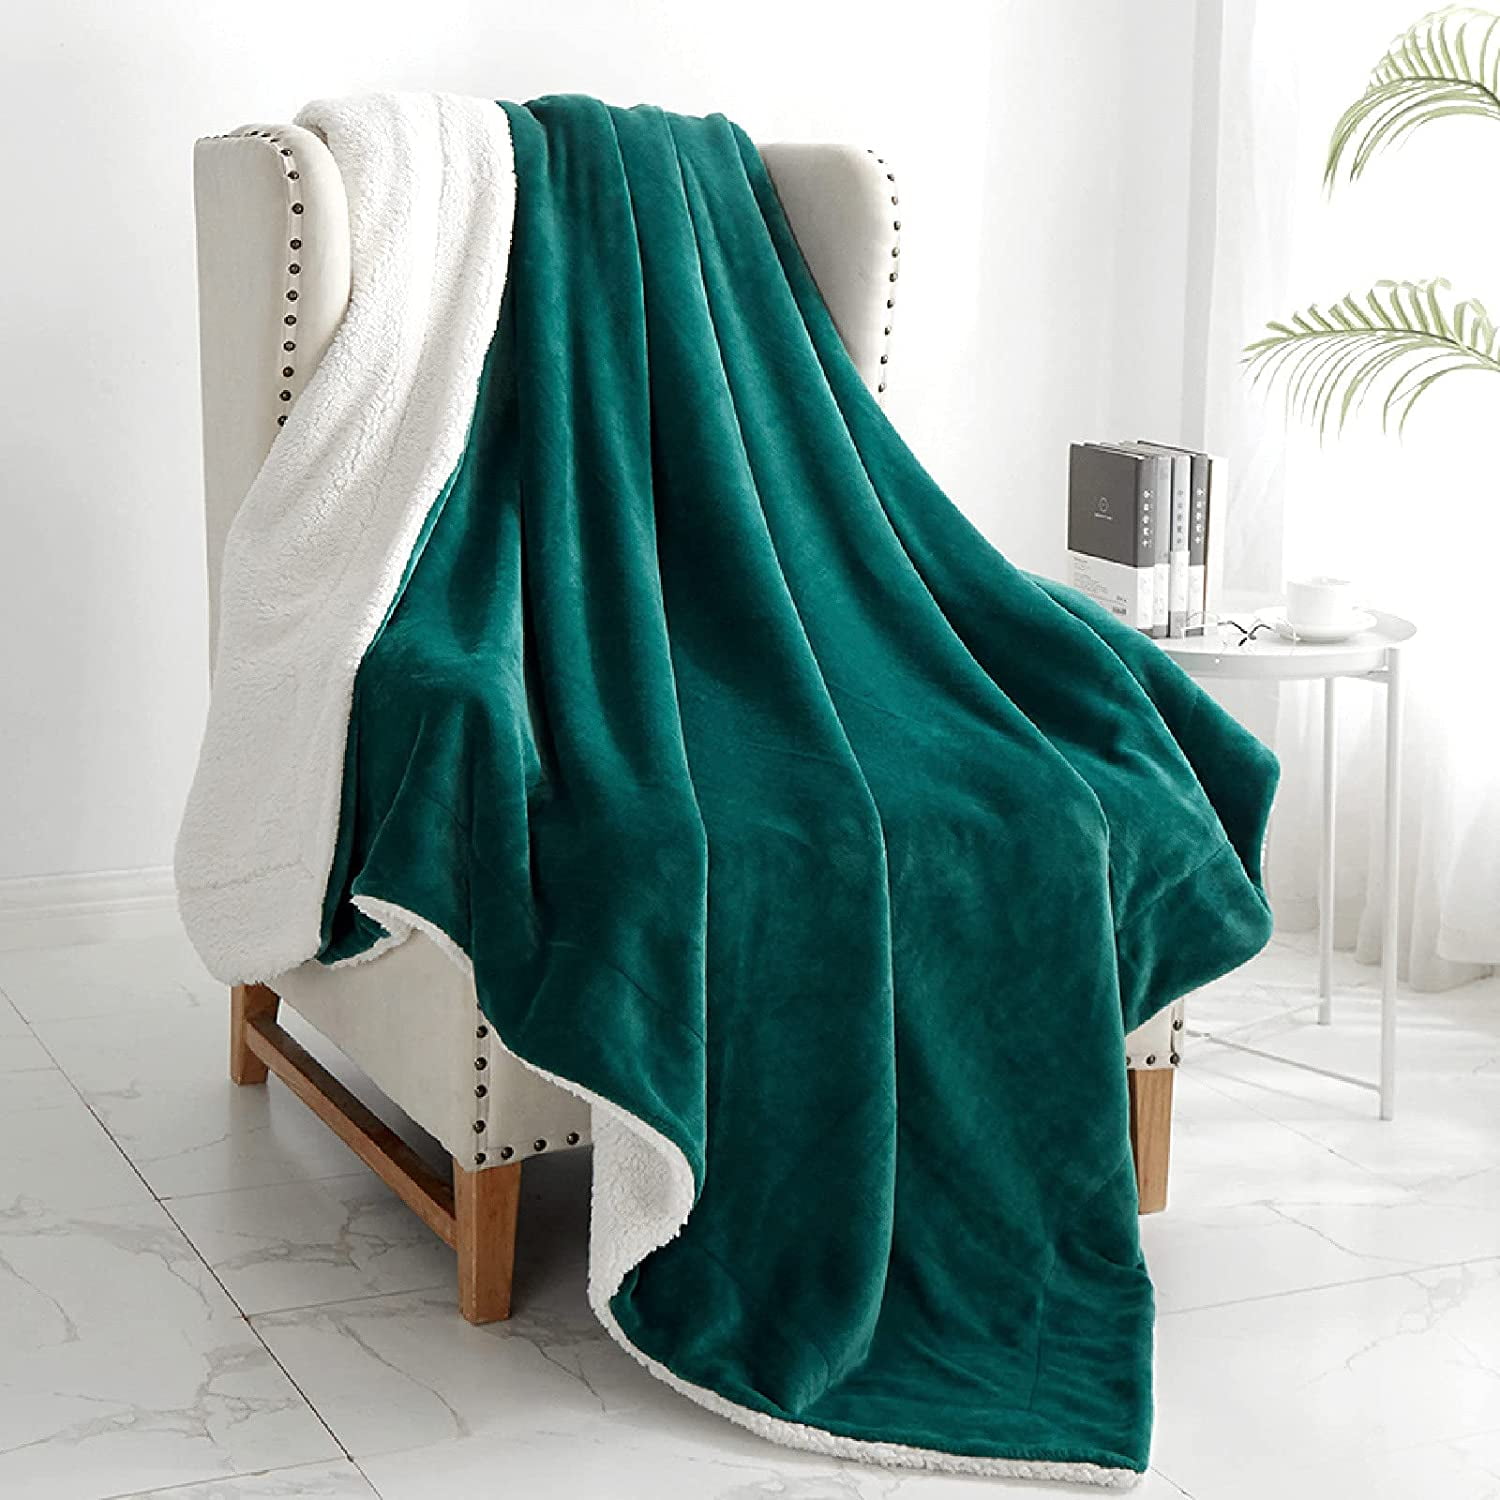 Bed Plush Throw Fuzzy Super Soft Reversible Microfiber Flannel Blankets for Couch Walensee Sherpa Fleece Blanket Sofa Ultra Luxurious Warm and Cozy for All Seasons Throw Size 50”x60” Turquoise 